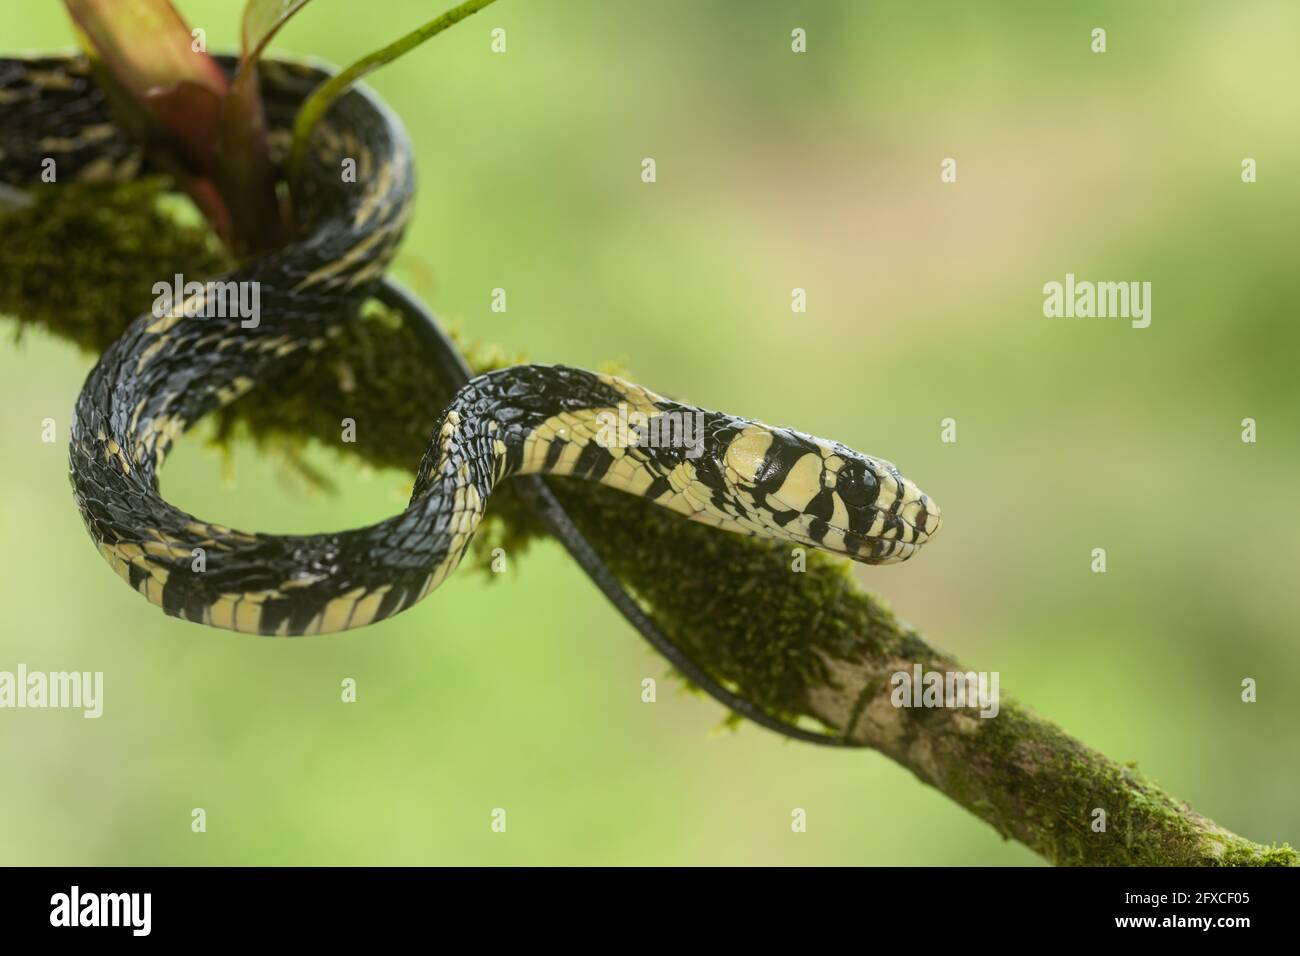 The Tiger Rat Snake, Spilotes pullatus, is a  non-venomous snake found from Mexico to central South America.  It can grow to 14 feet in length. Stock Photo